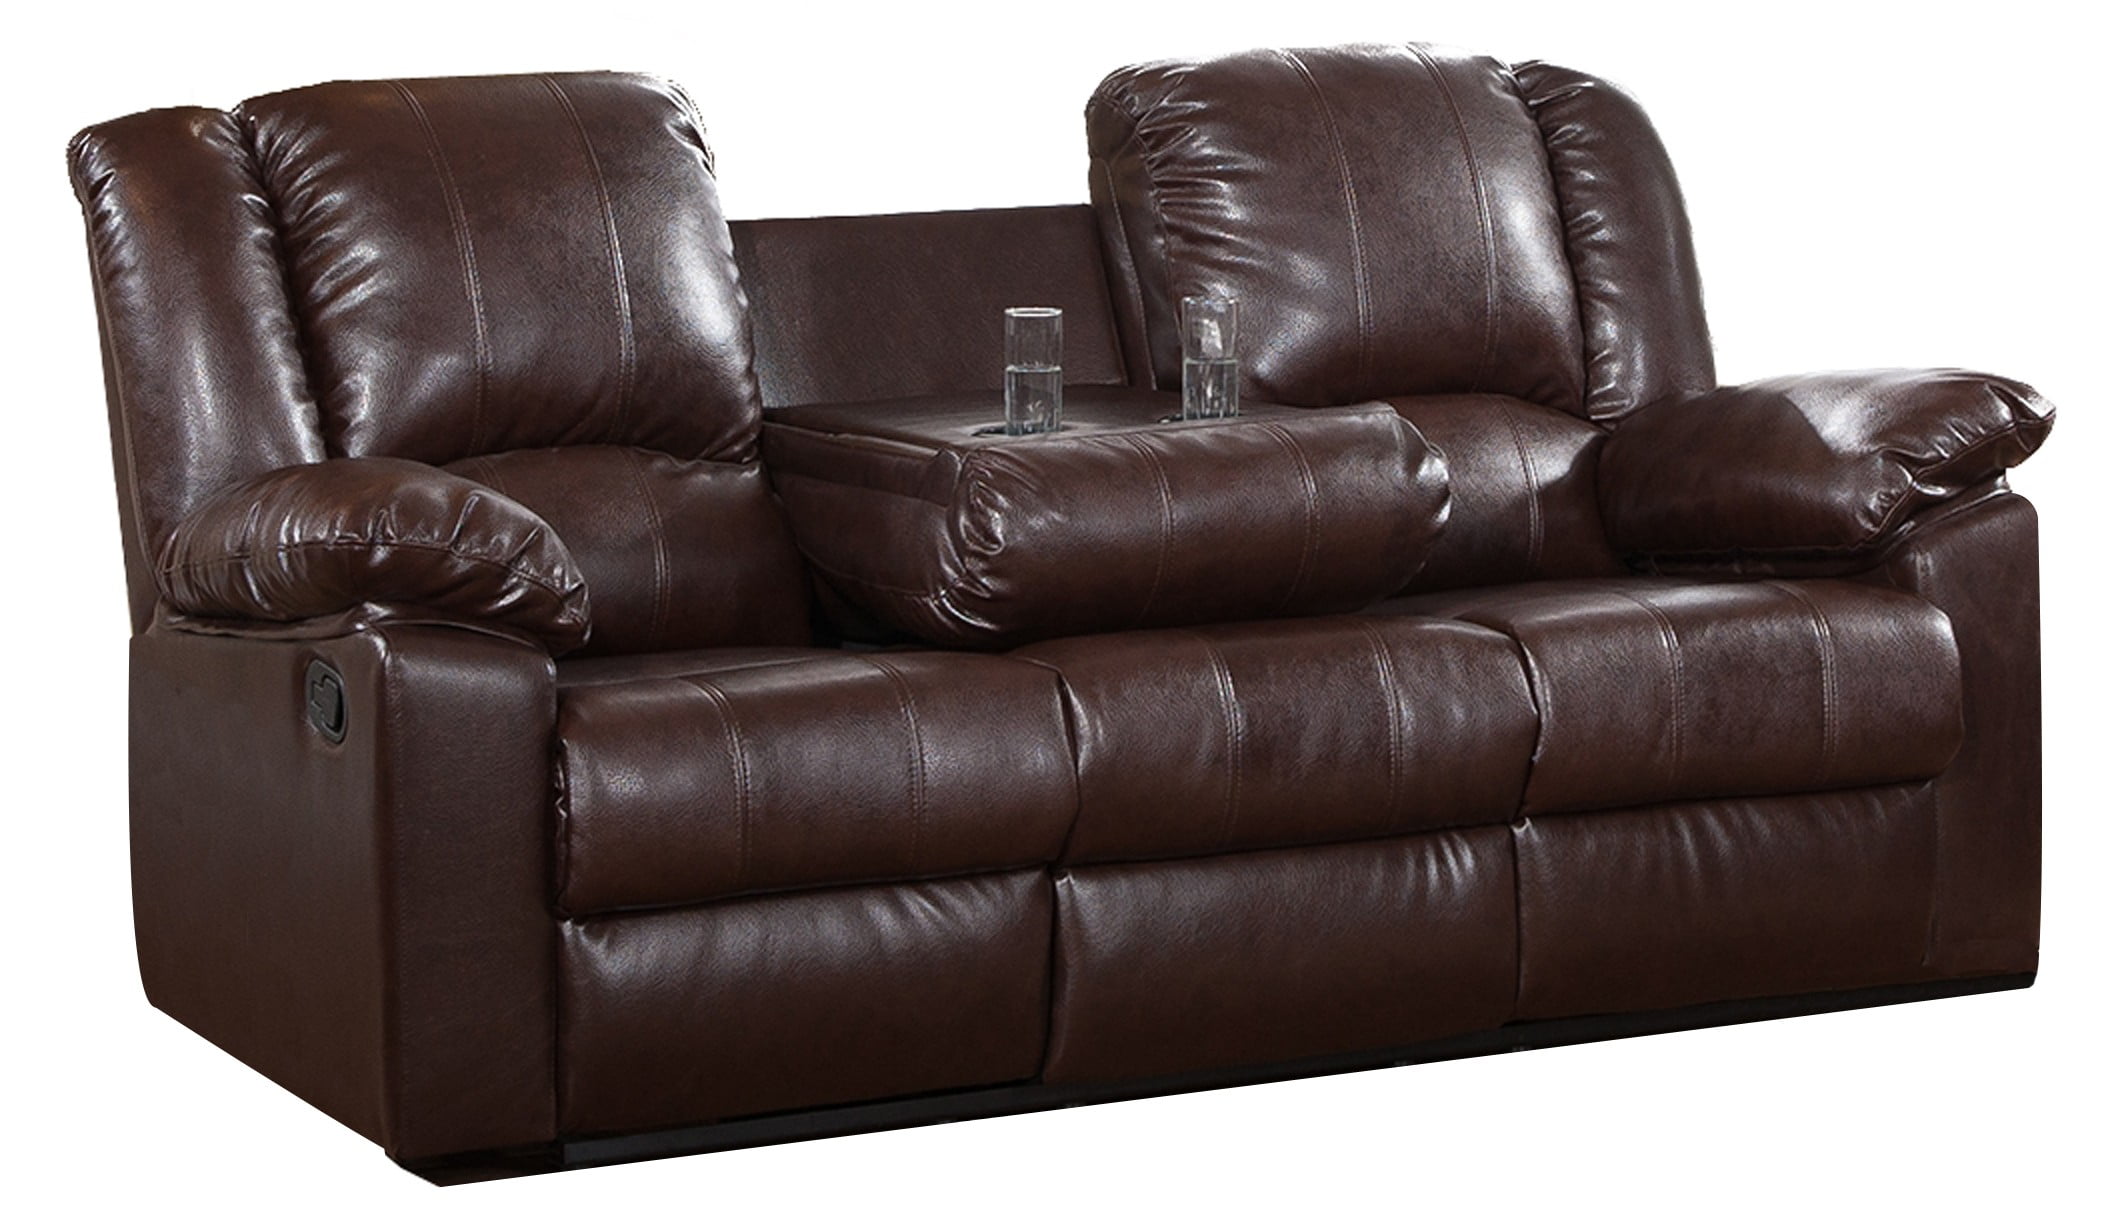 leather sofa with drink holders